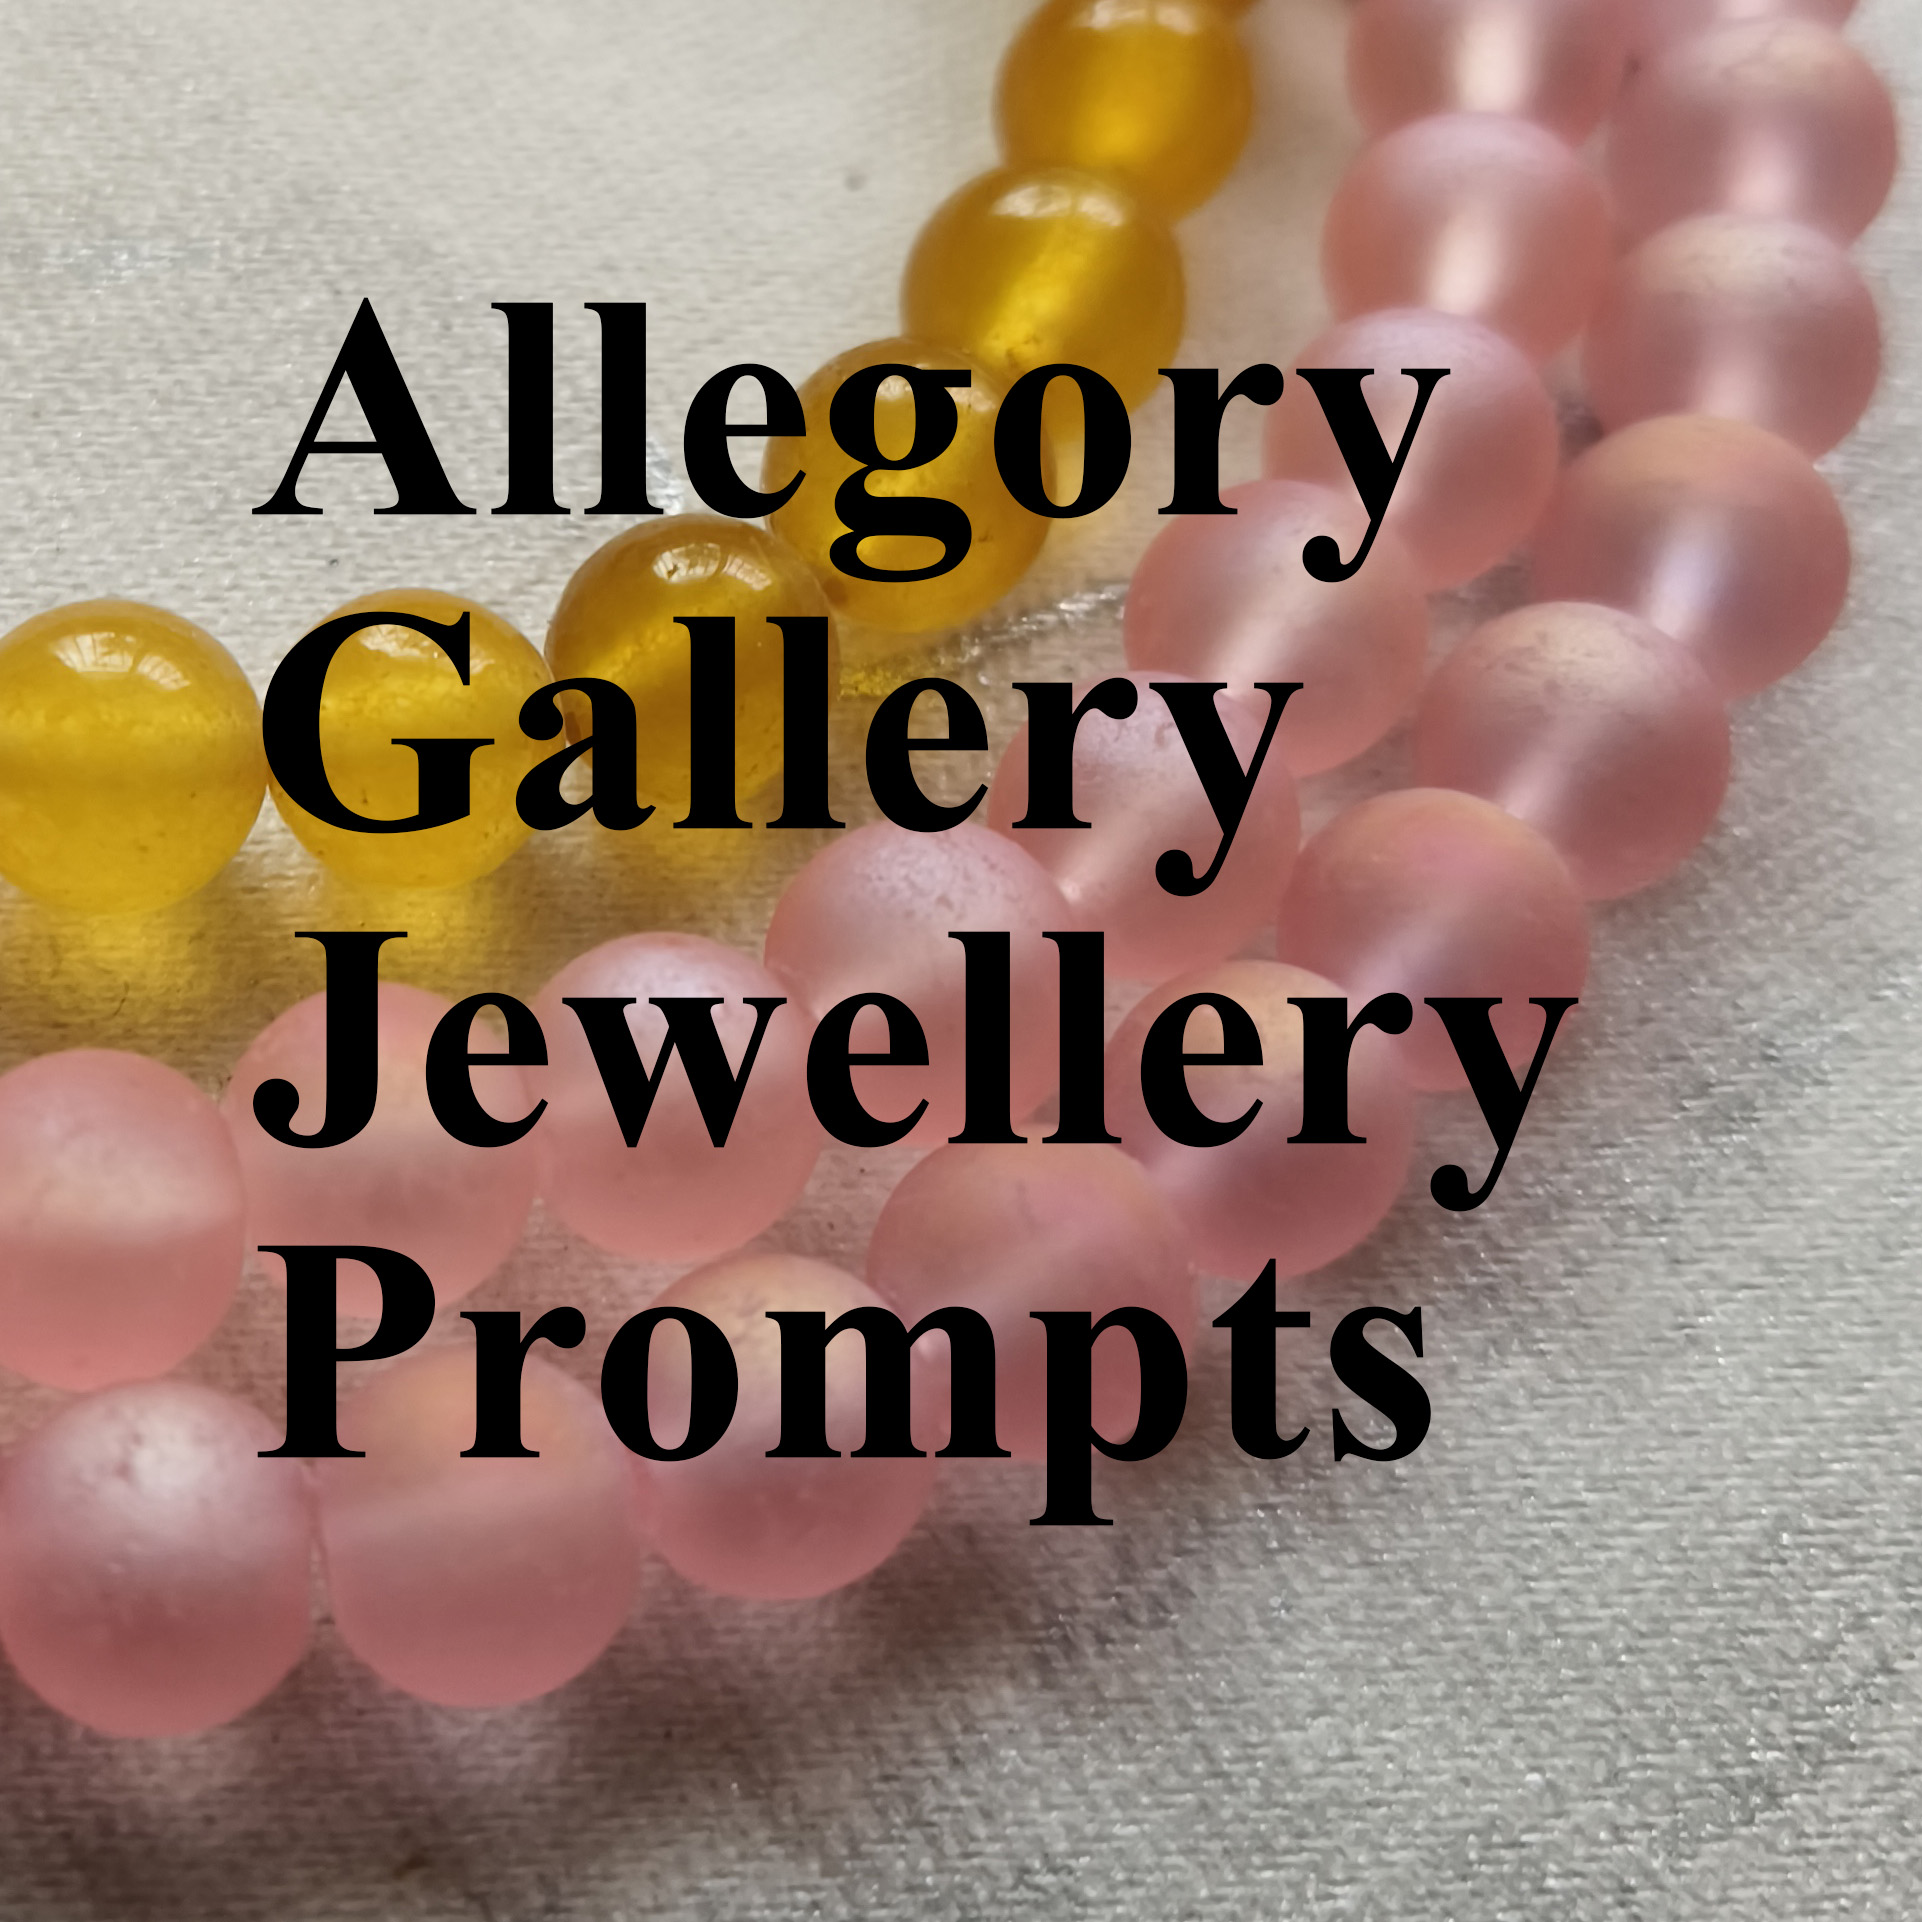 Allegory Gallery jewellery prompts